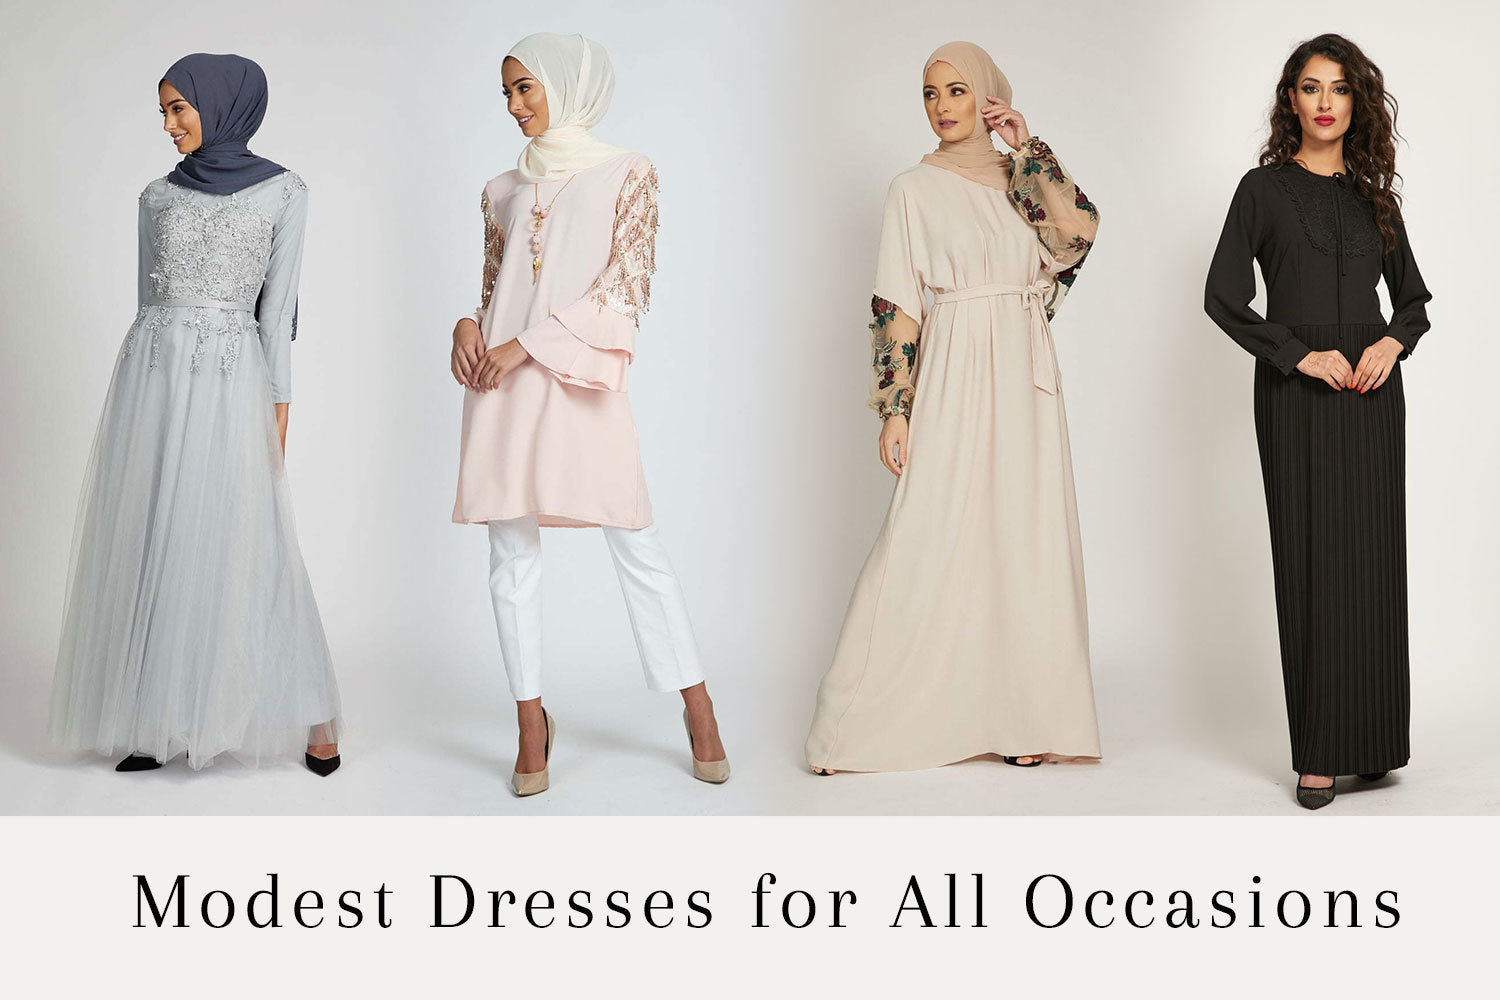 Getting Your Post-Lockdown Fashion Fix: Modest Dresses for All Occasions